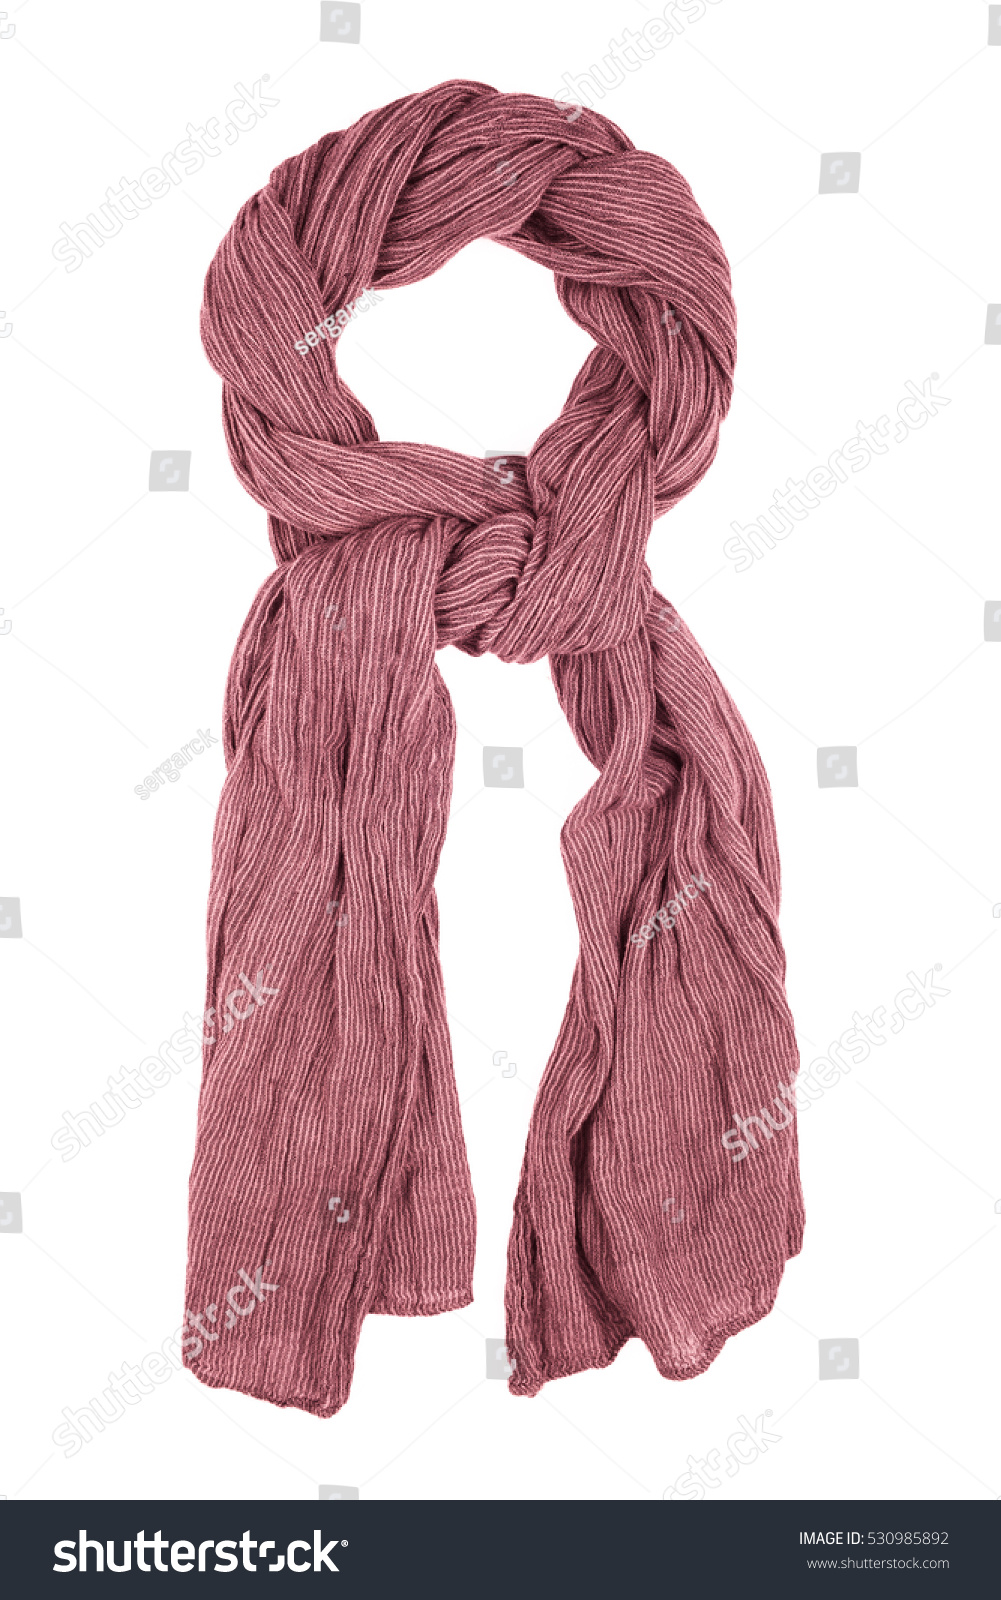 Purple wool scarf isolated on white background. Female accessory. #530985892